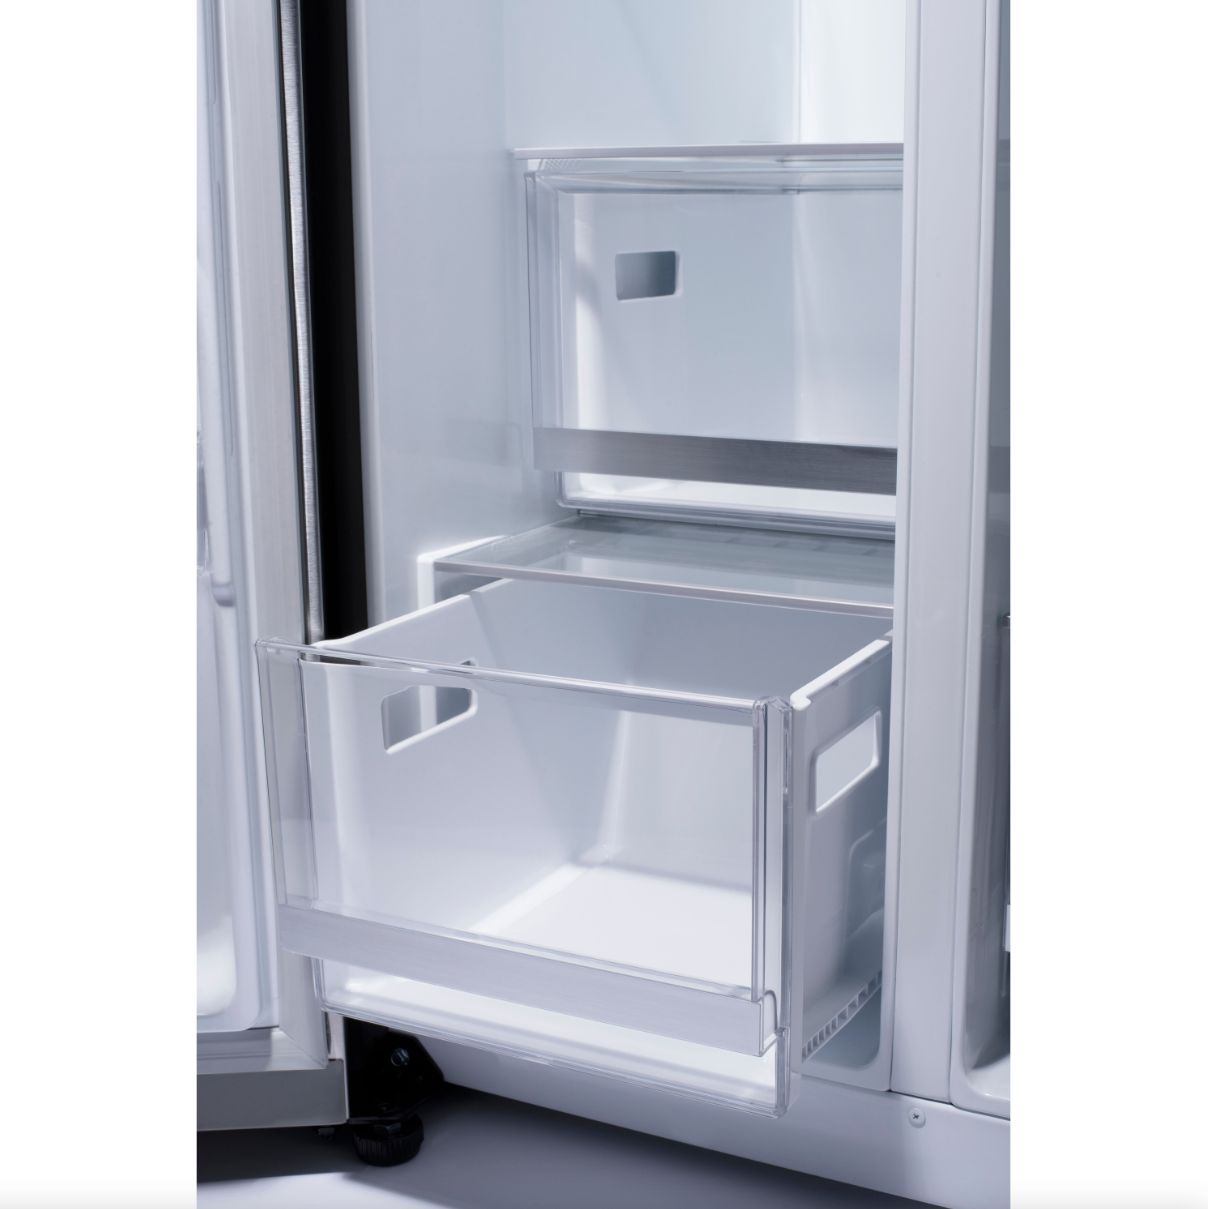 LG 36 Inch Side-by-Side InstaView Refrigerator with Craft Ice in Stainless 27 Cu. Ft. (LRSOS2706S)